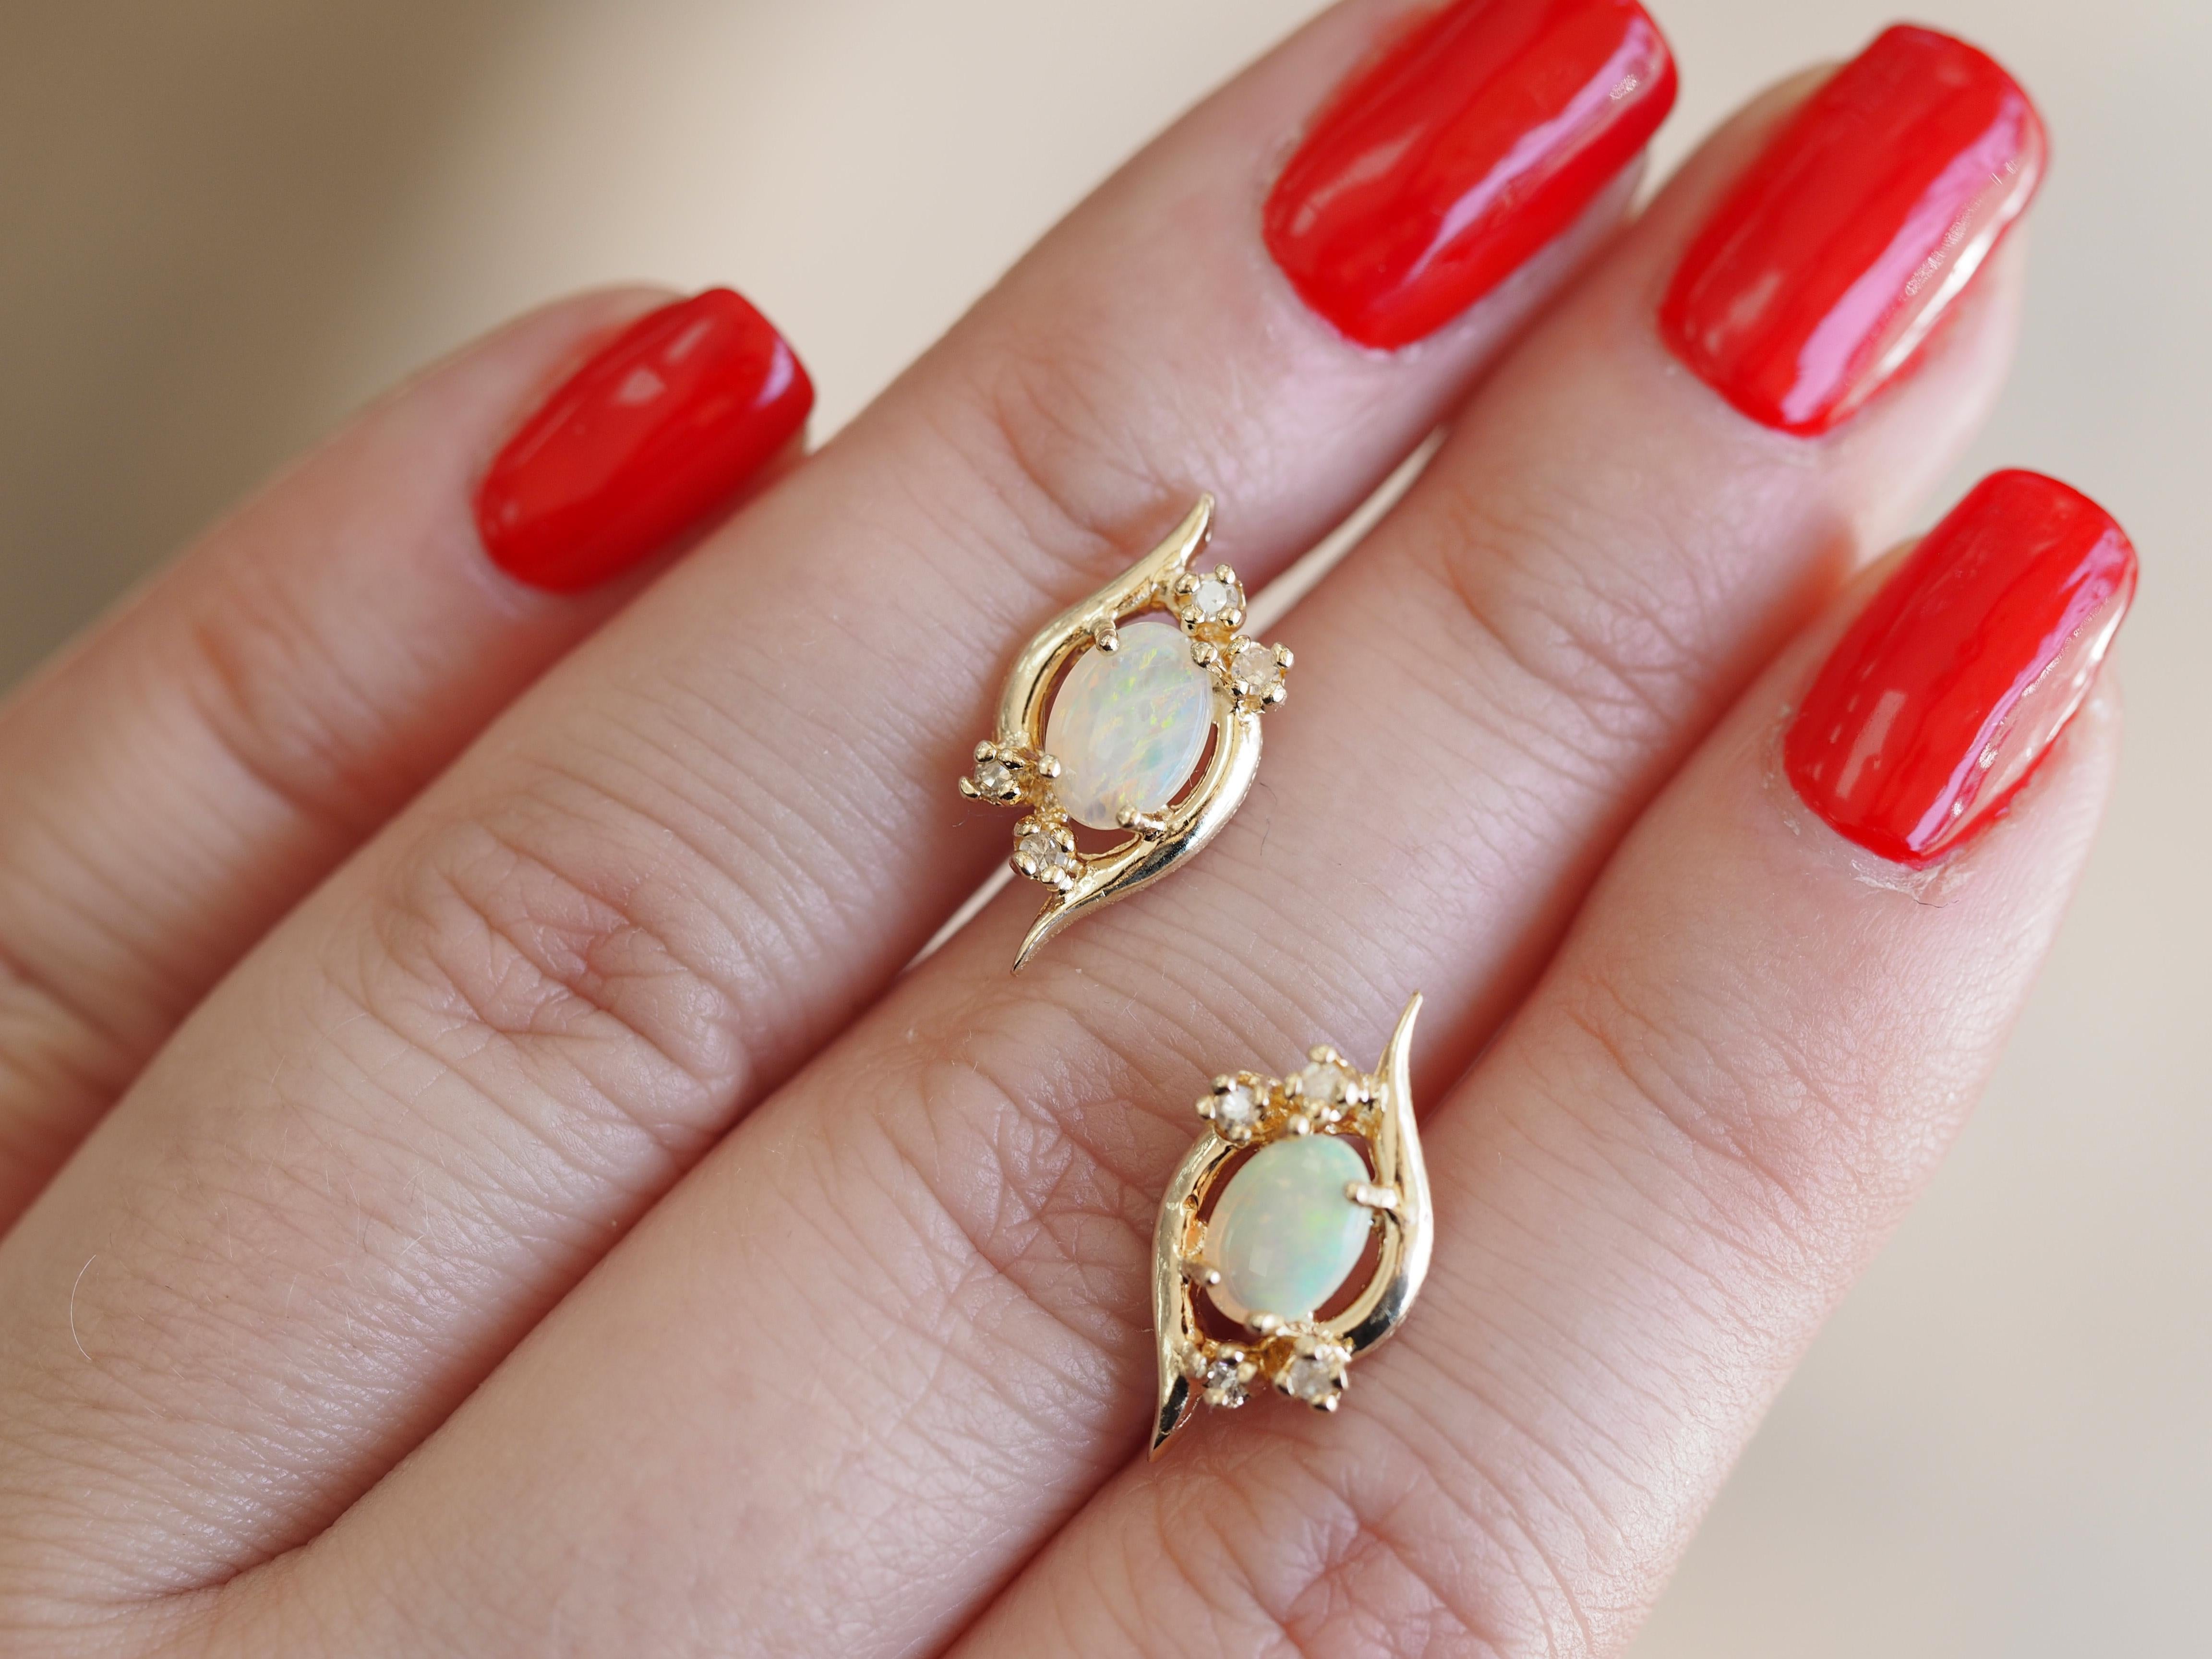 These lovely earrings are a vintage lover's dream. The timeless look of natural white opals surrounded with diamonds and set in yellow gold is such a beautiful vintage style. Each earring features a Oval Shape opal with diamonds. They would be